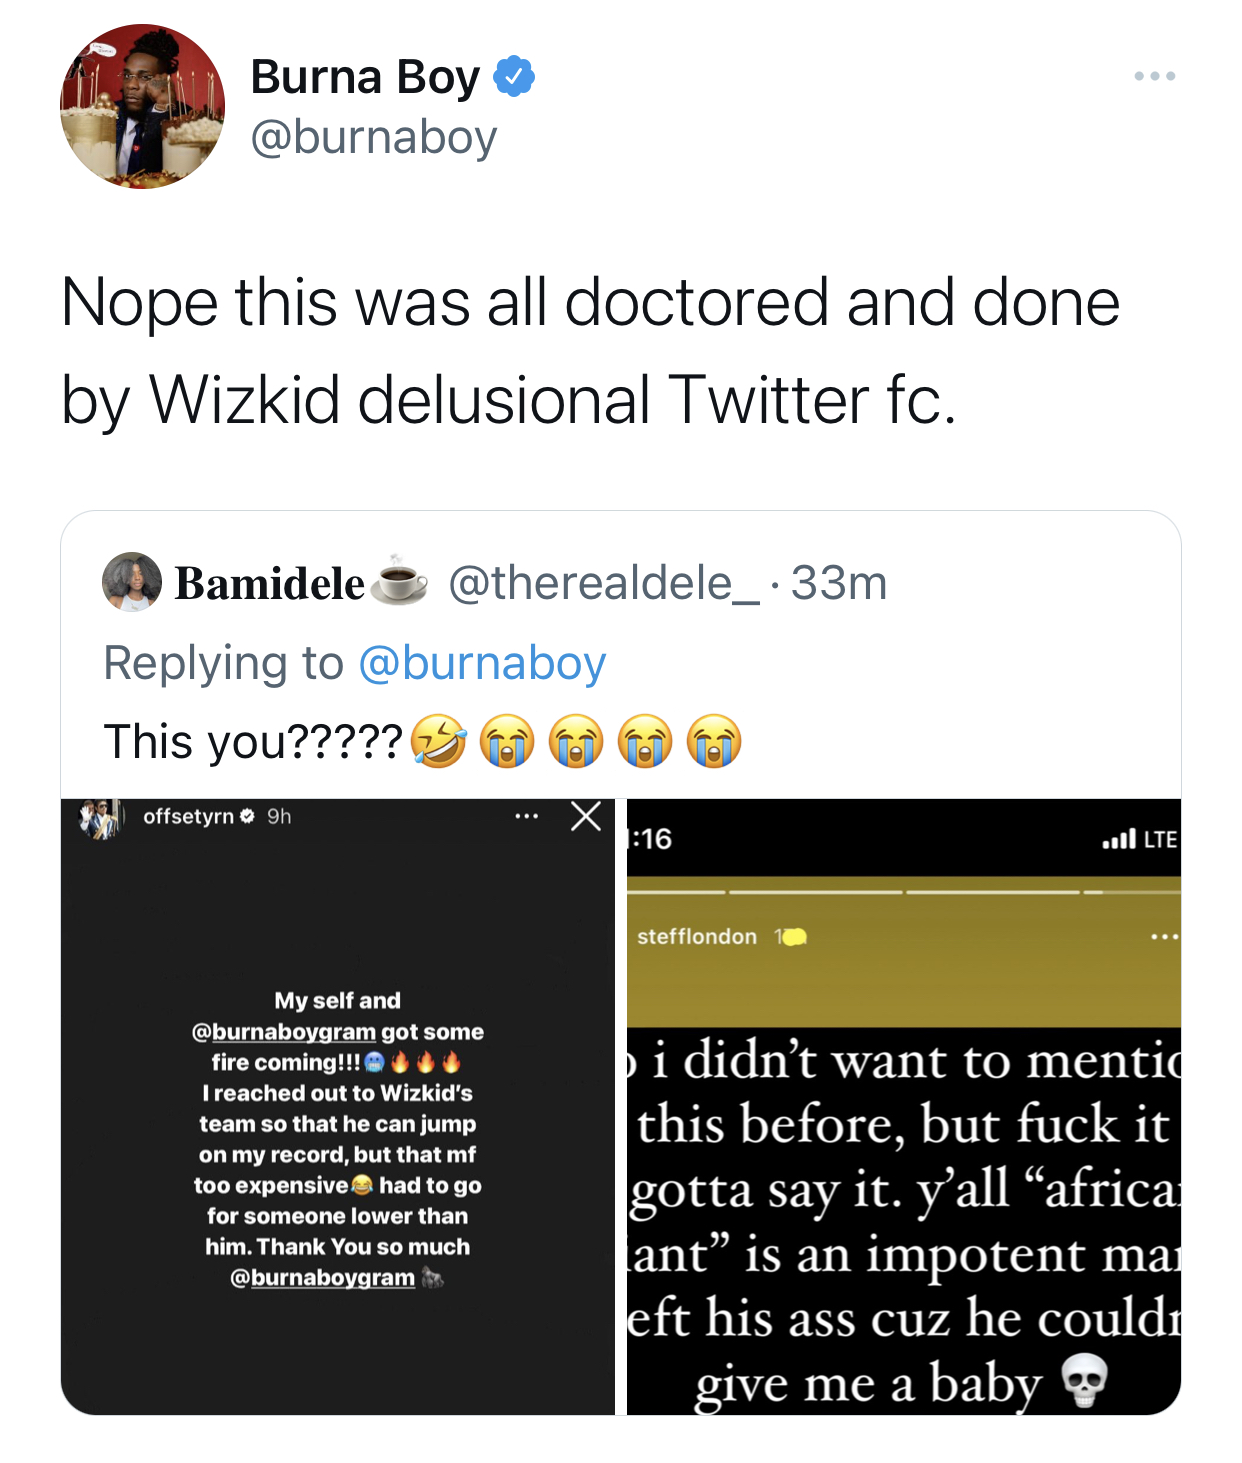 Wizkid wouldn’t have idiotic fan base if history was taught in schools - Burna Boy Lashes Out